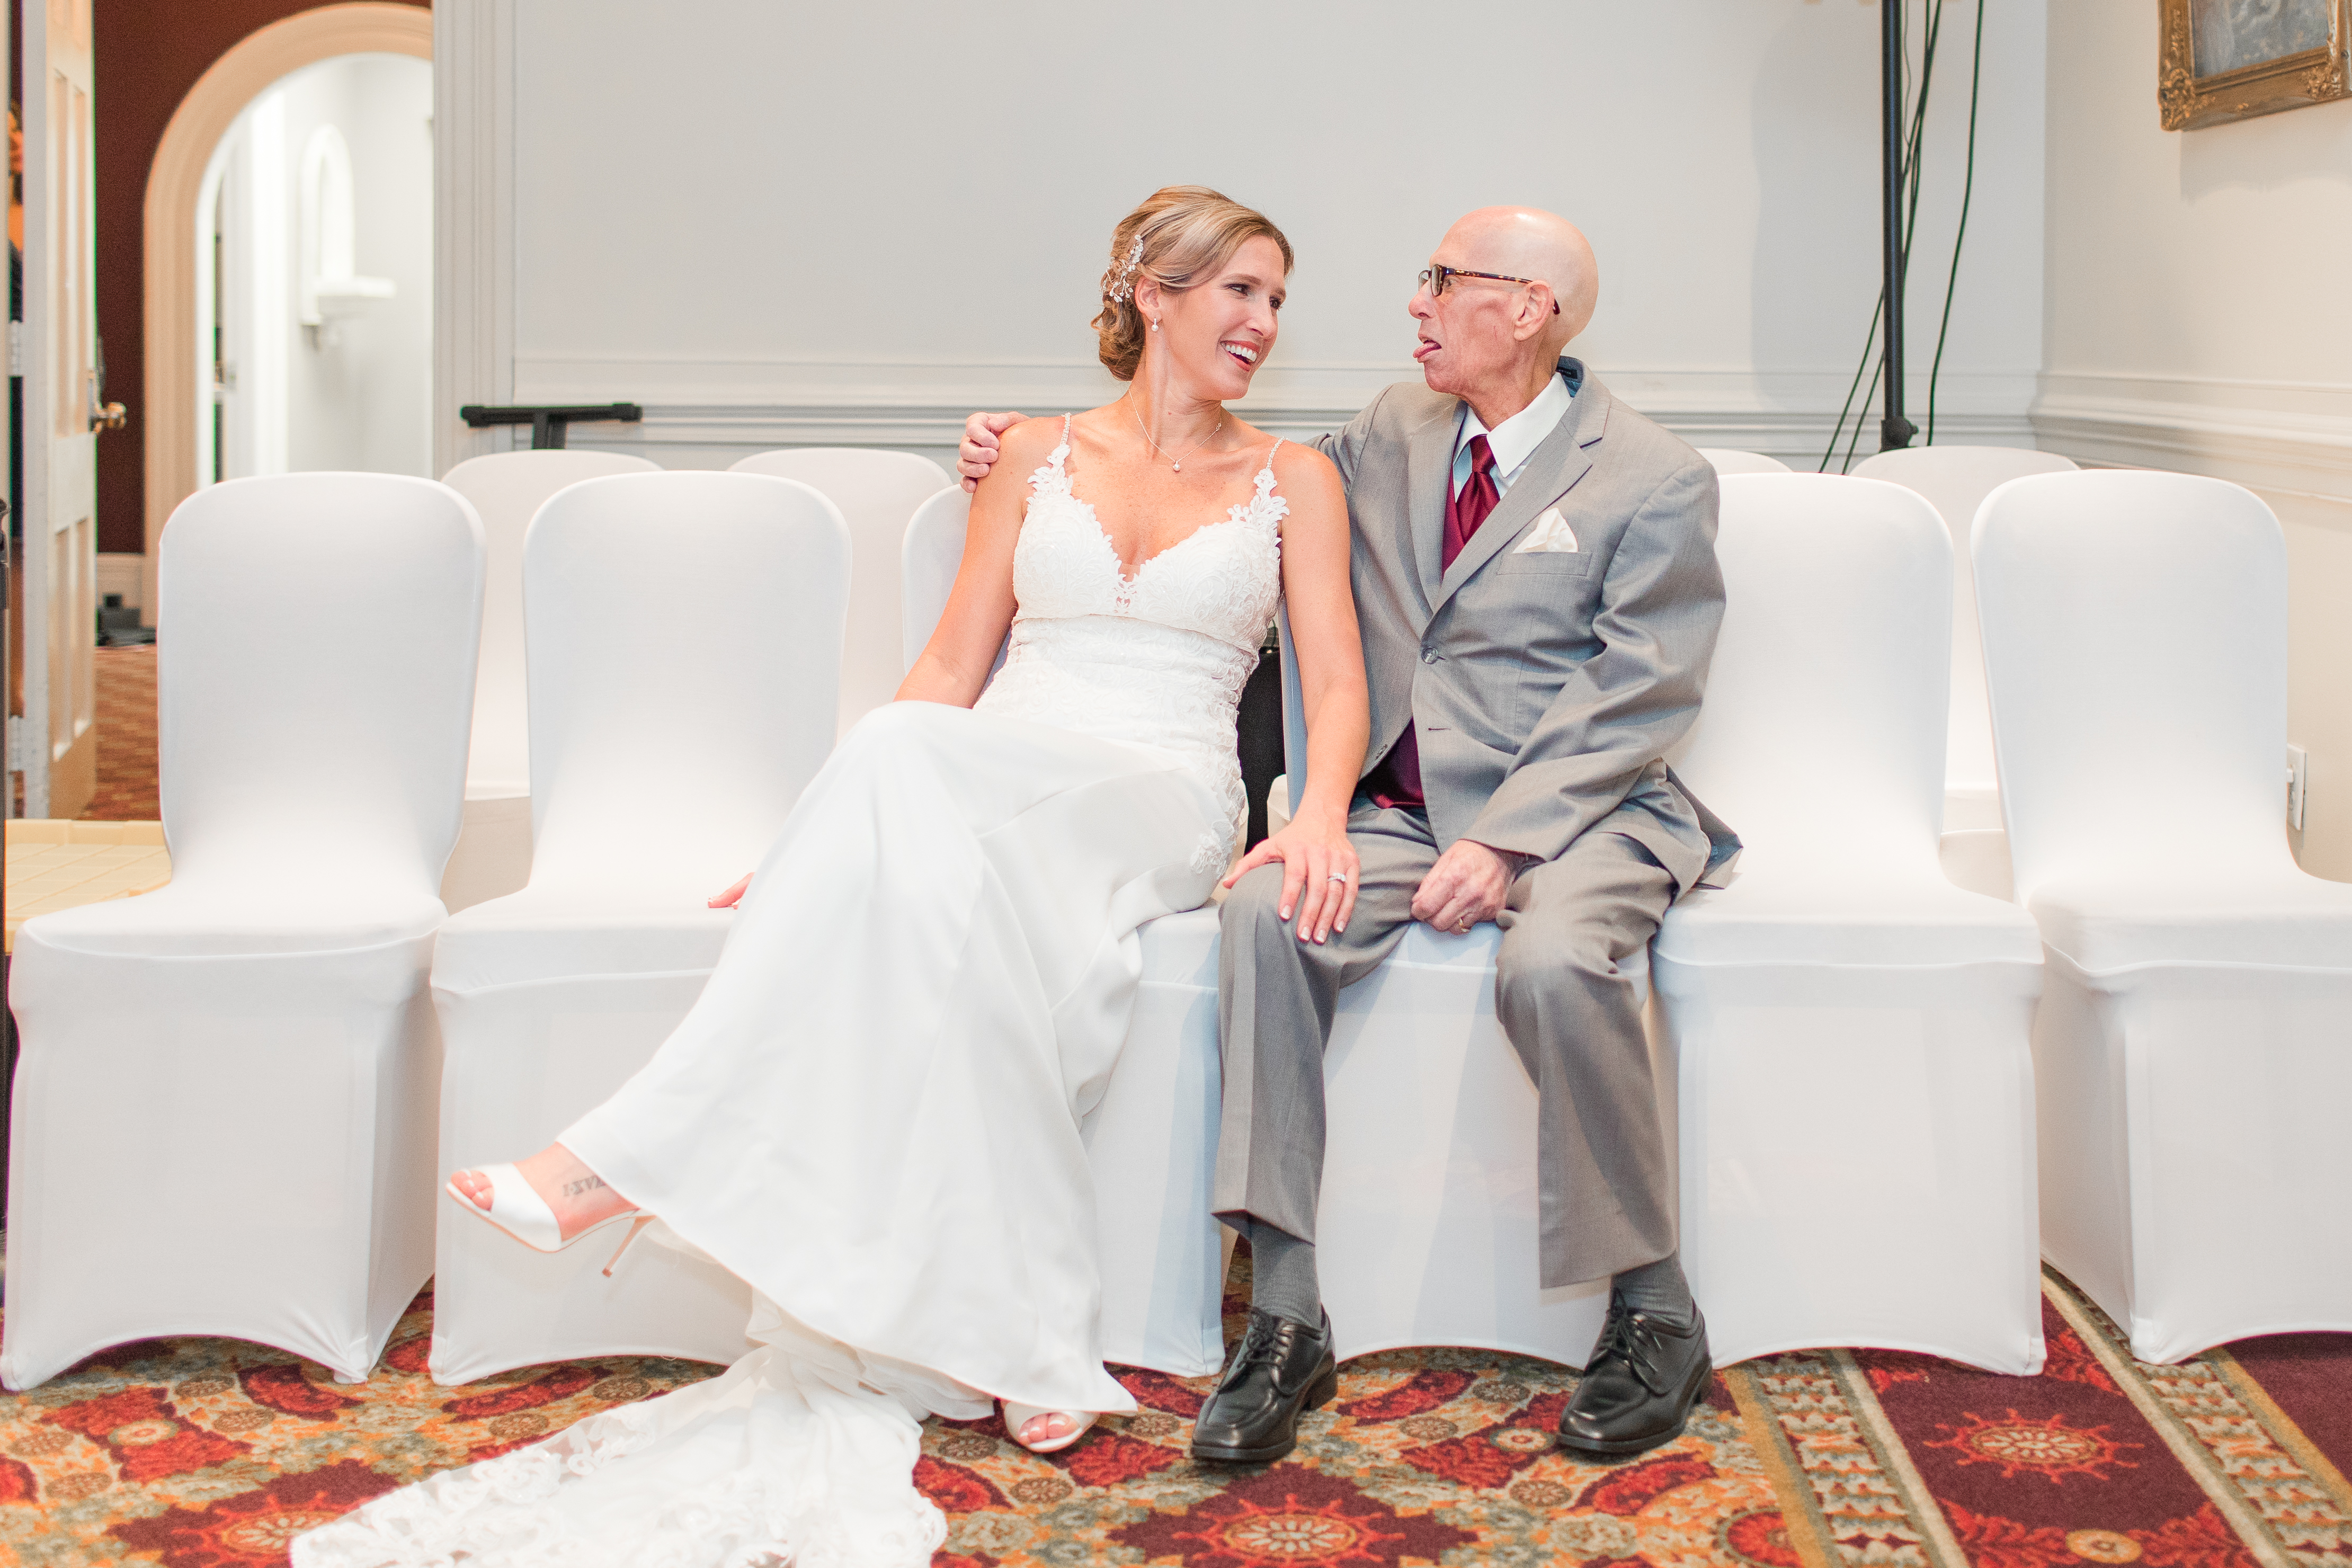 Wedding in Richmond Virginia at the Renaissance by the tuckers photography